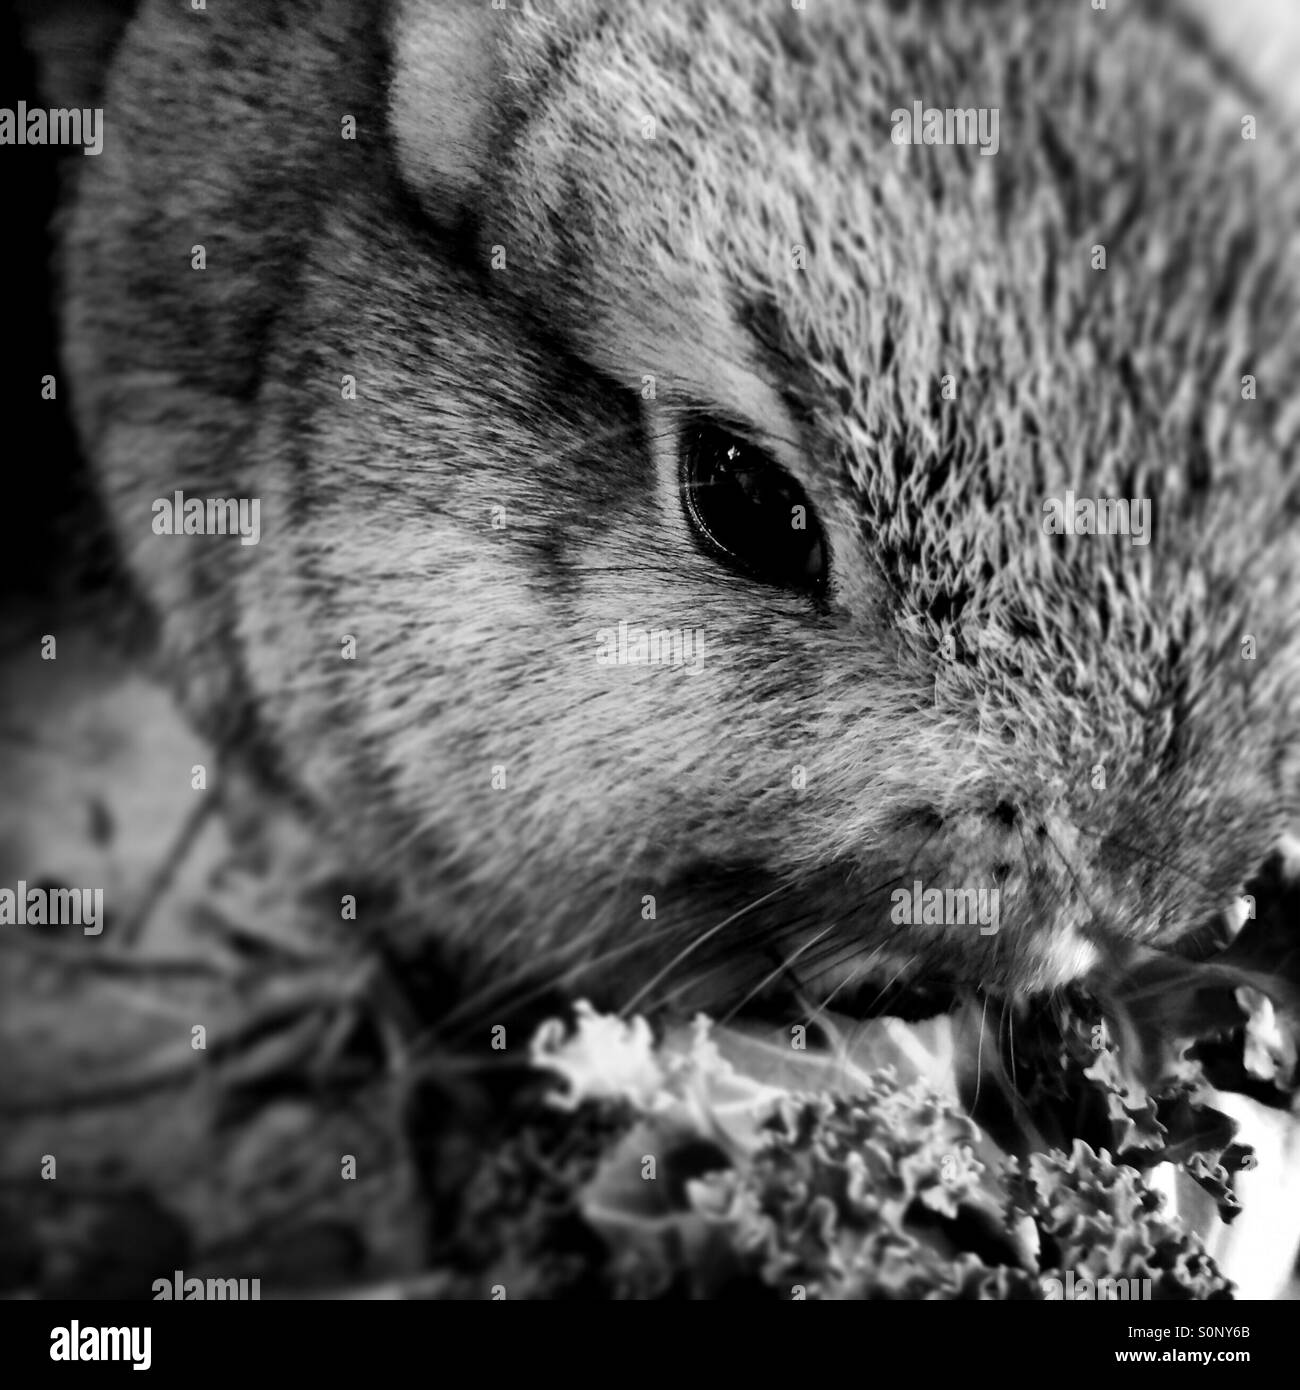 A baby rabbit eating kale. Stock Photo